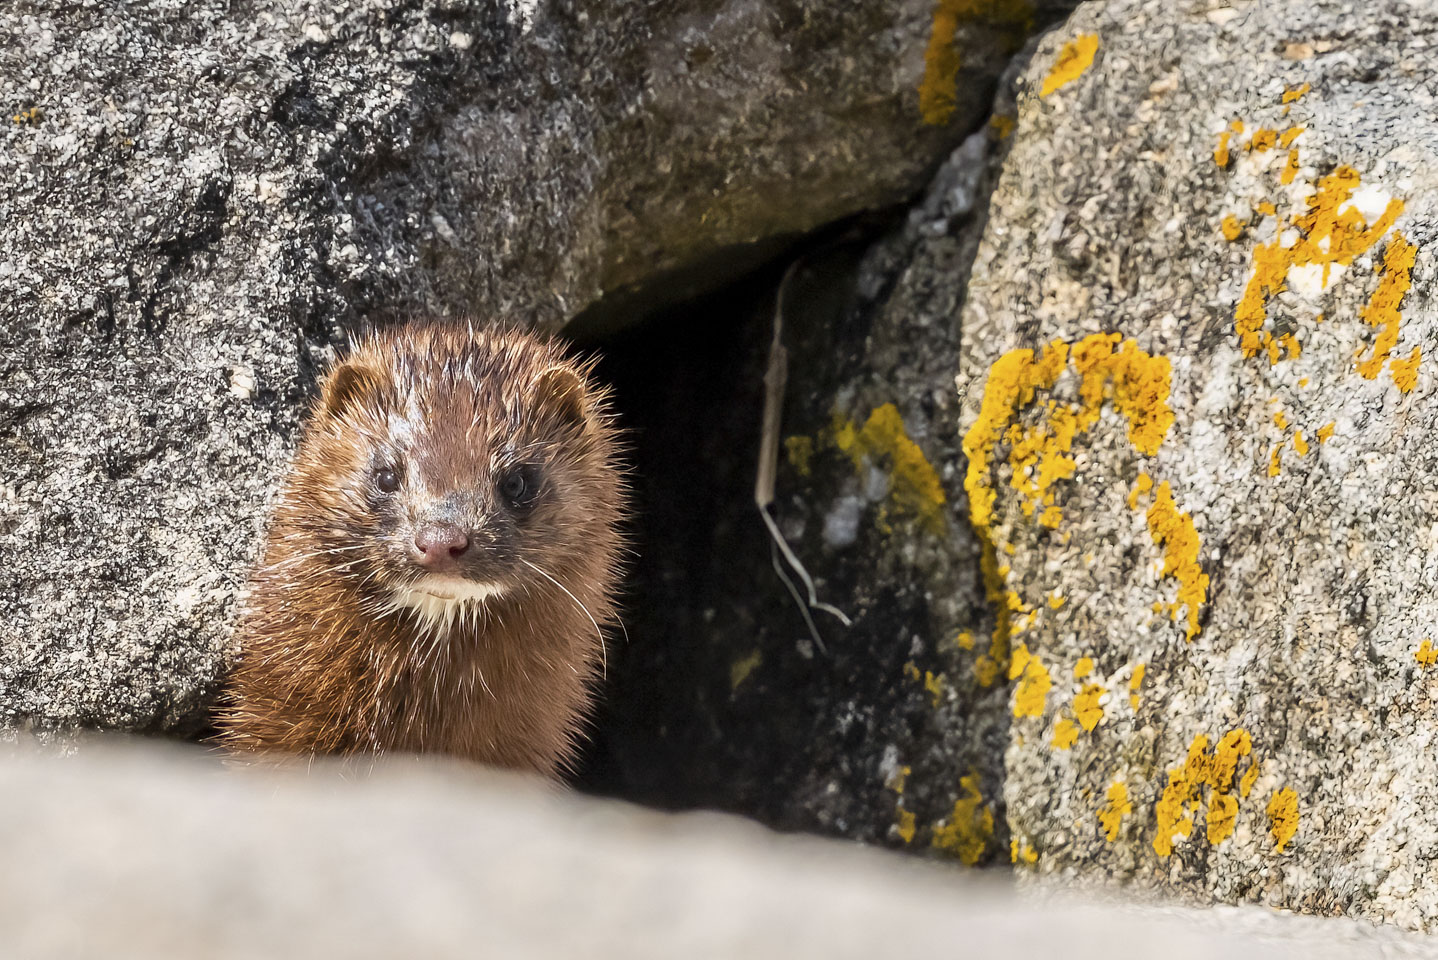 A mink looking at the camera